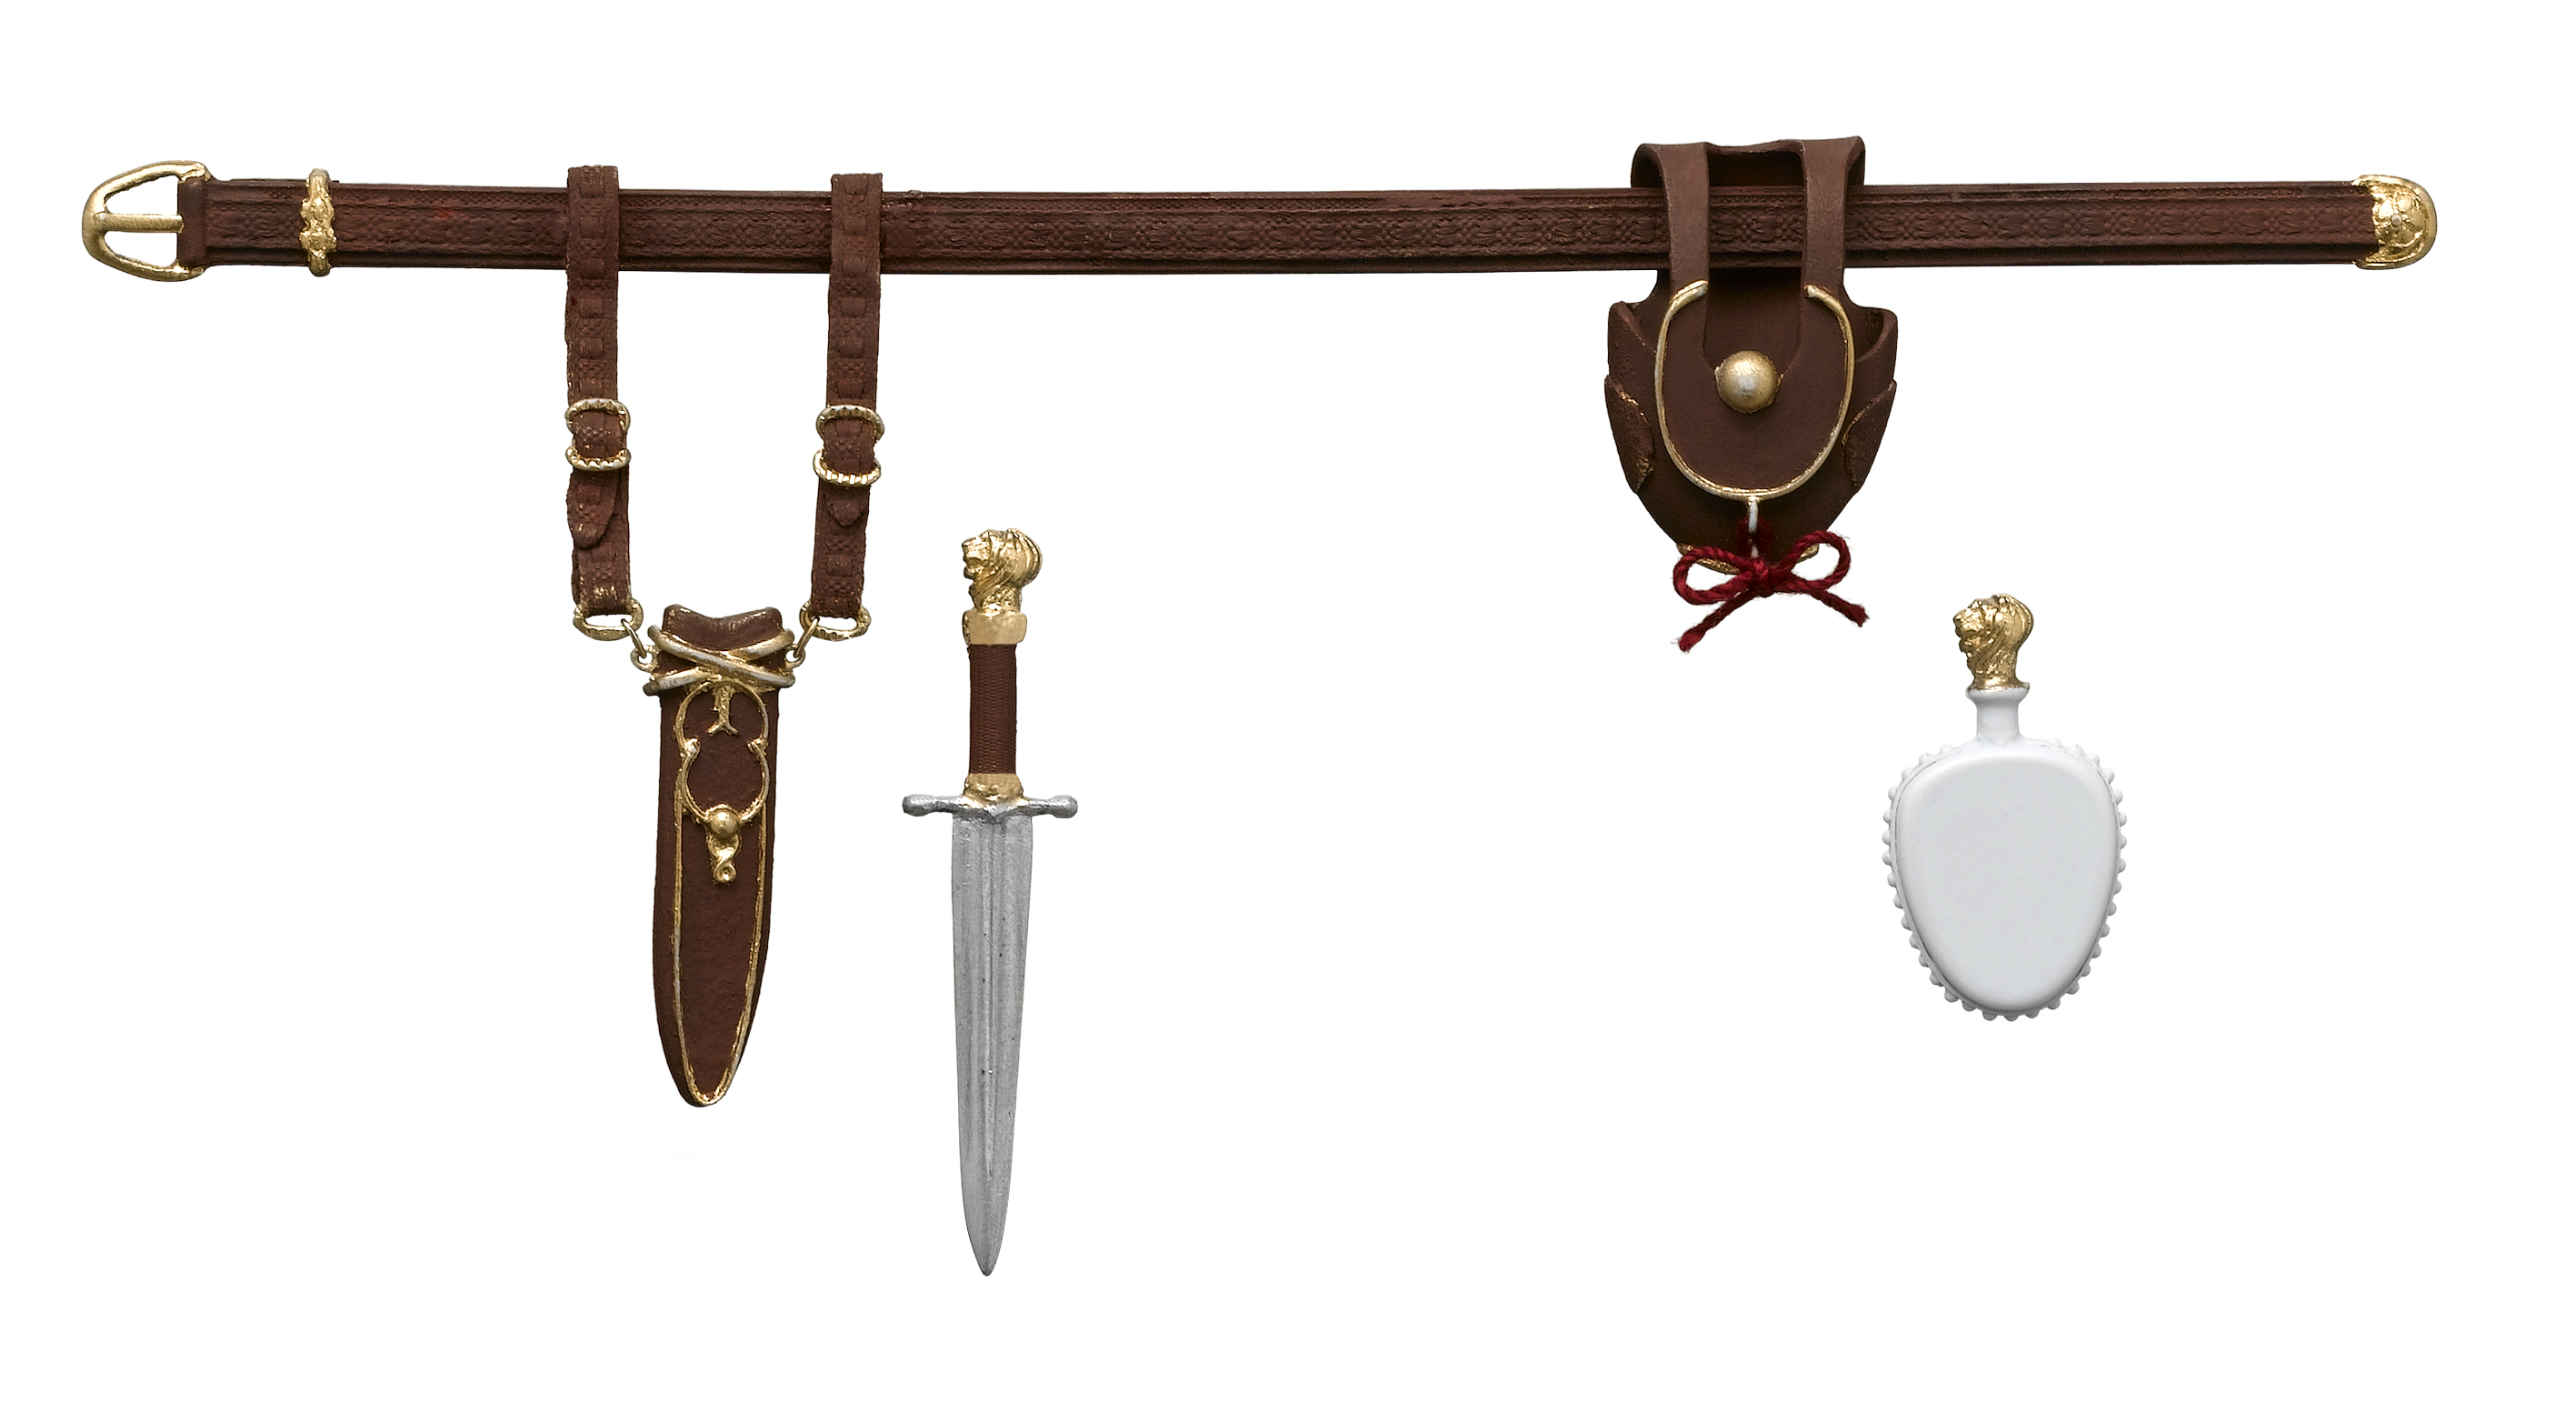 Master Replicas' Narnia Product Details.